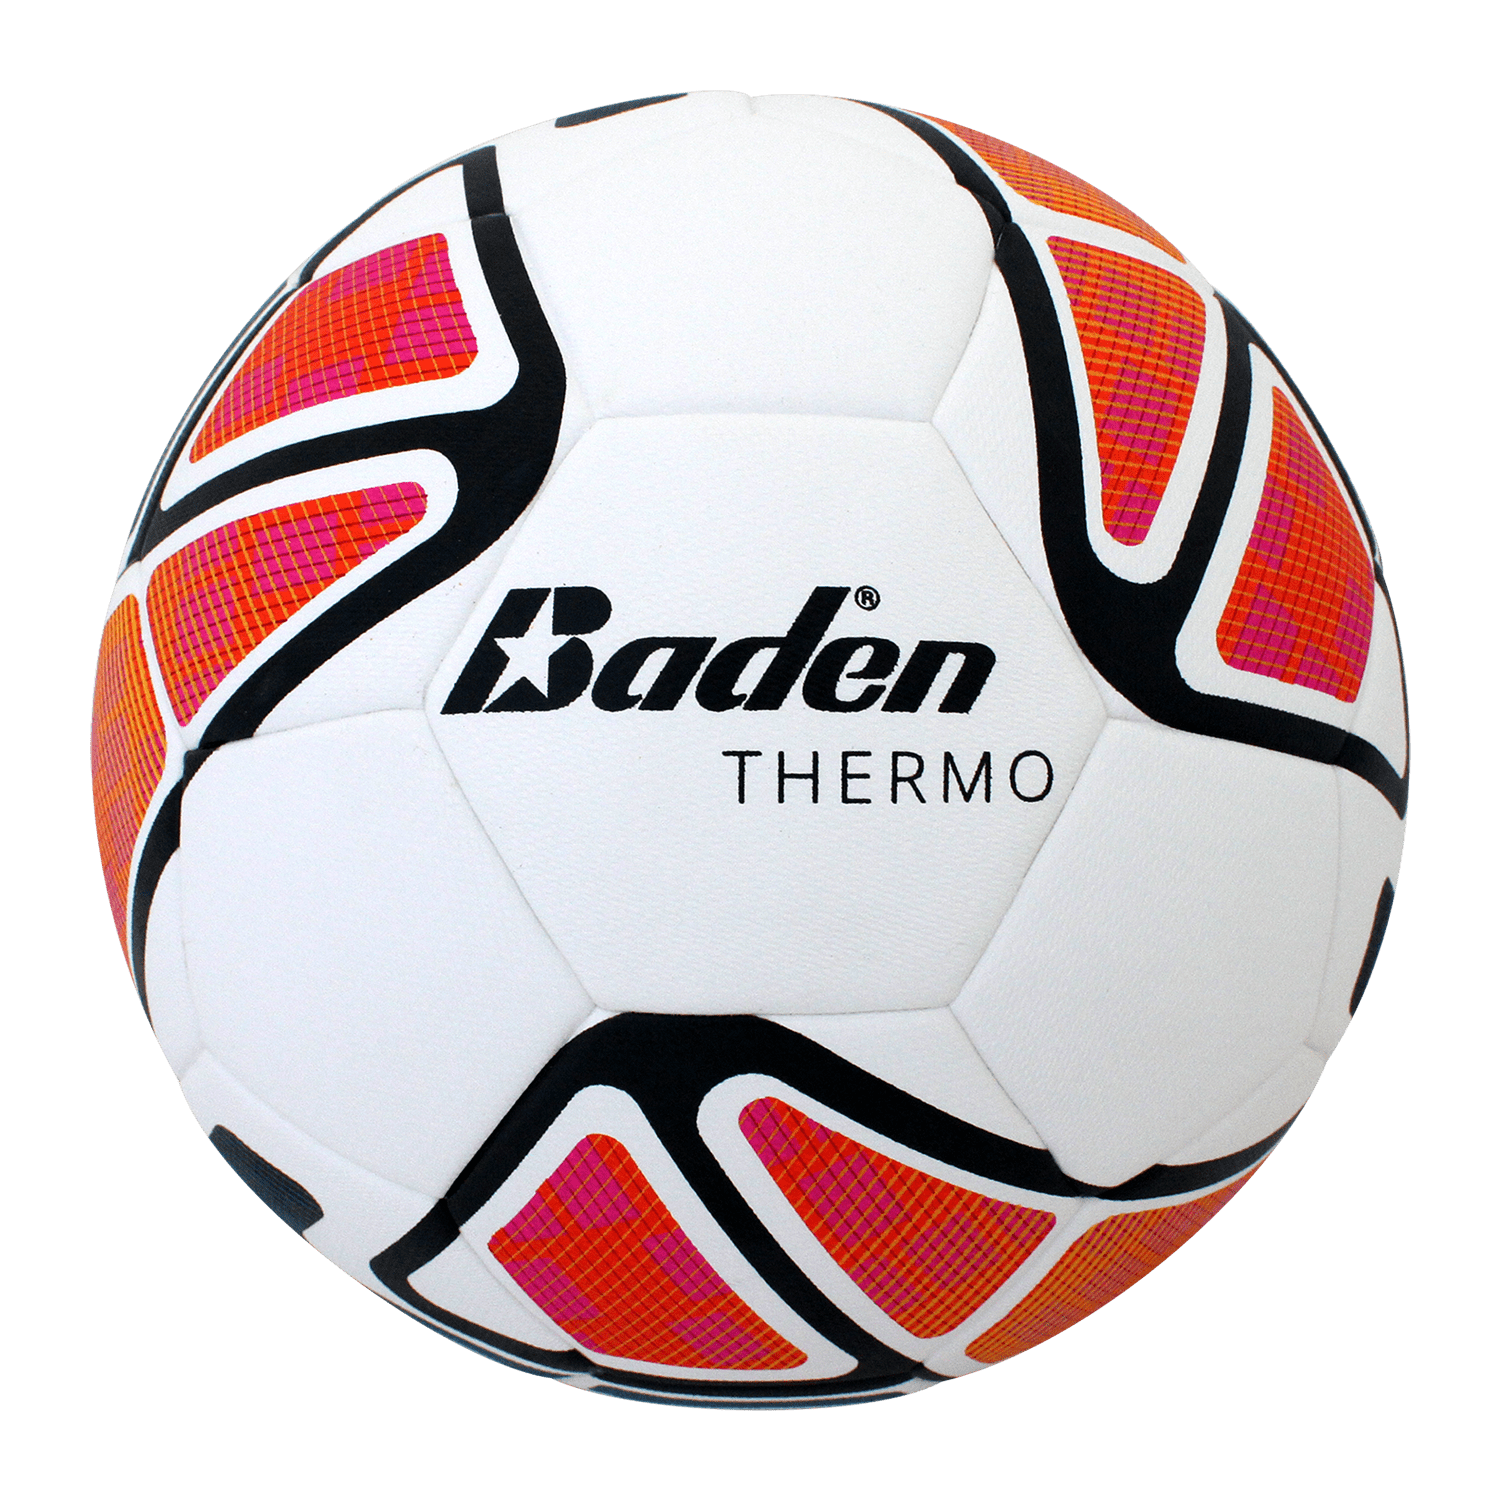 CLASICO Training & Recreation Soccer Ball Free Carrying Net Bag &Needle with Strip Nation Pattern Official Size 5 for Ages 12+ 